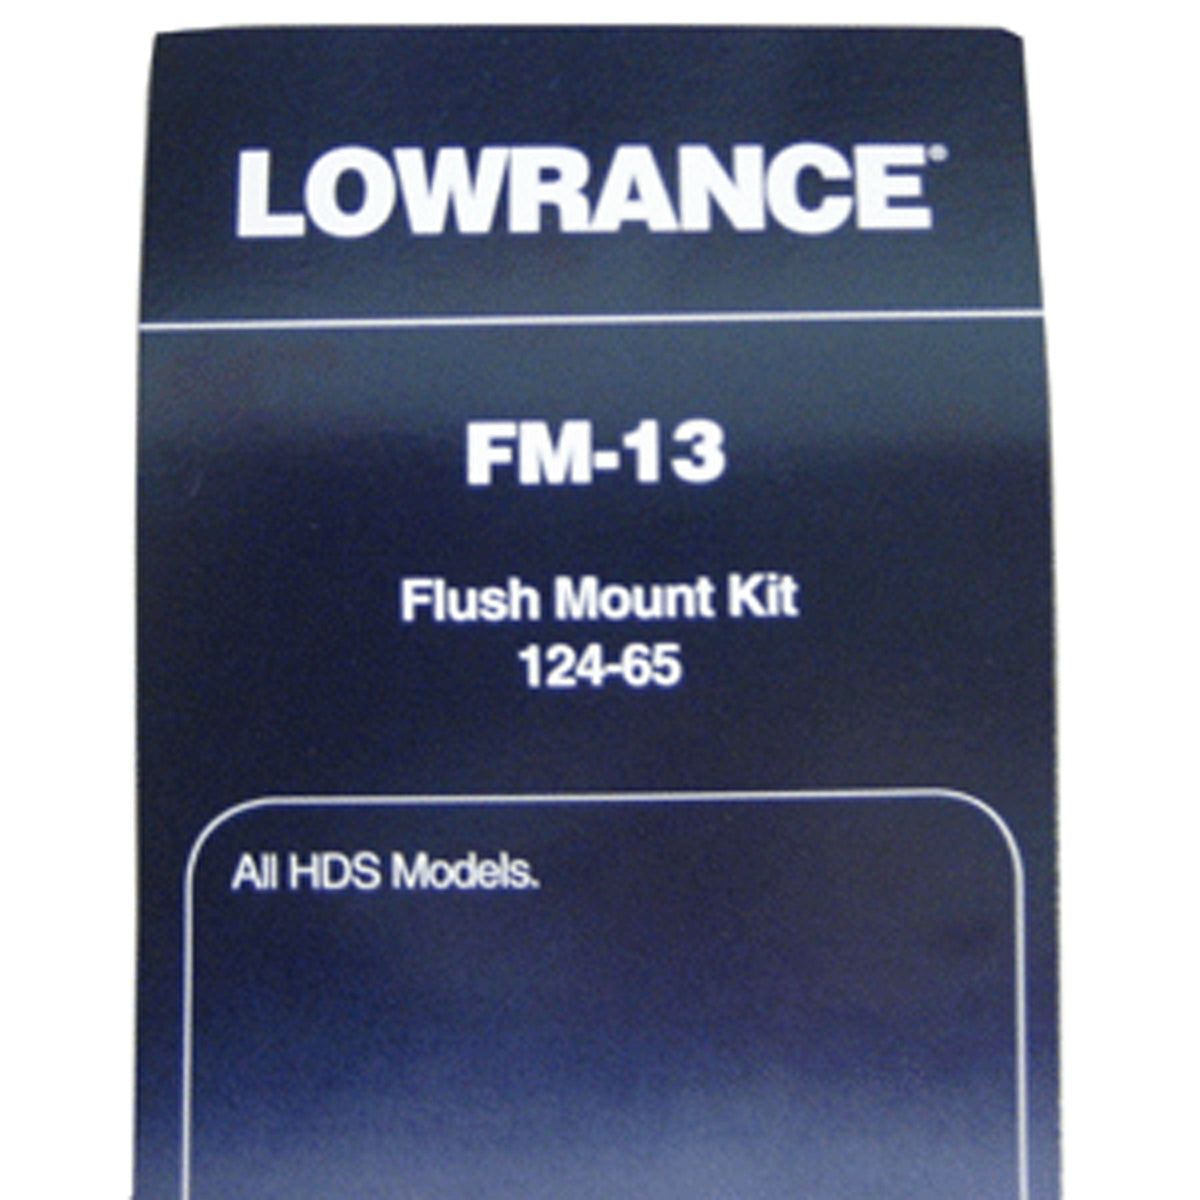 Lowrance Qualifies for Free Shipping Lowrance FM-12 Flush Mount Kit for HDS #000-0124-65